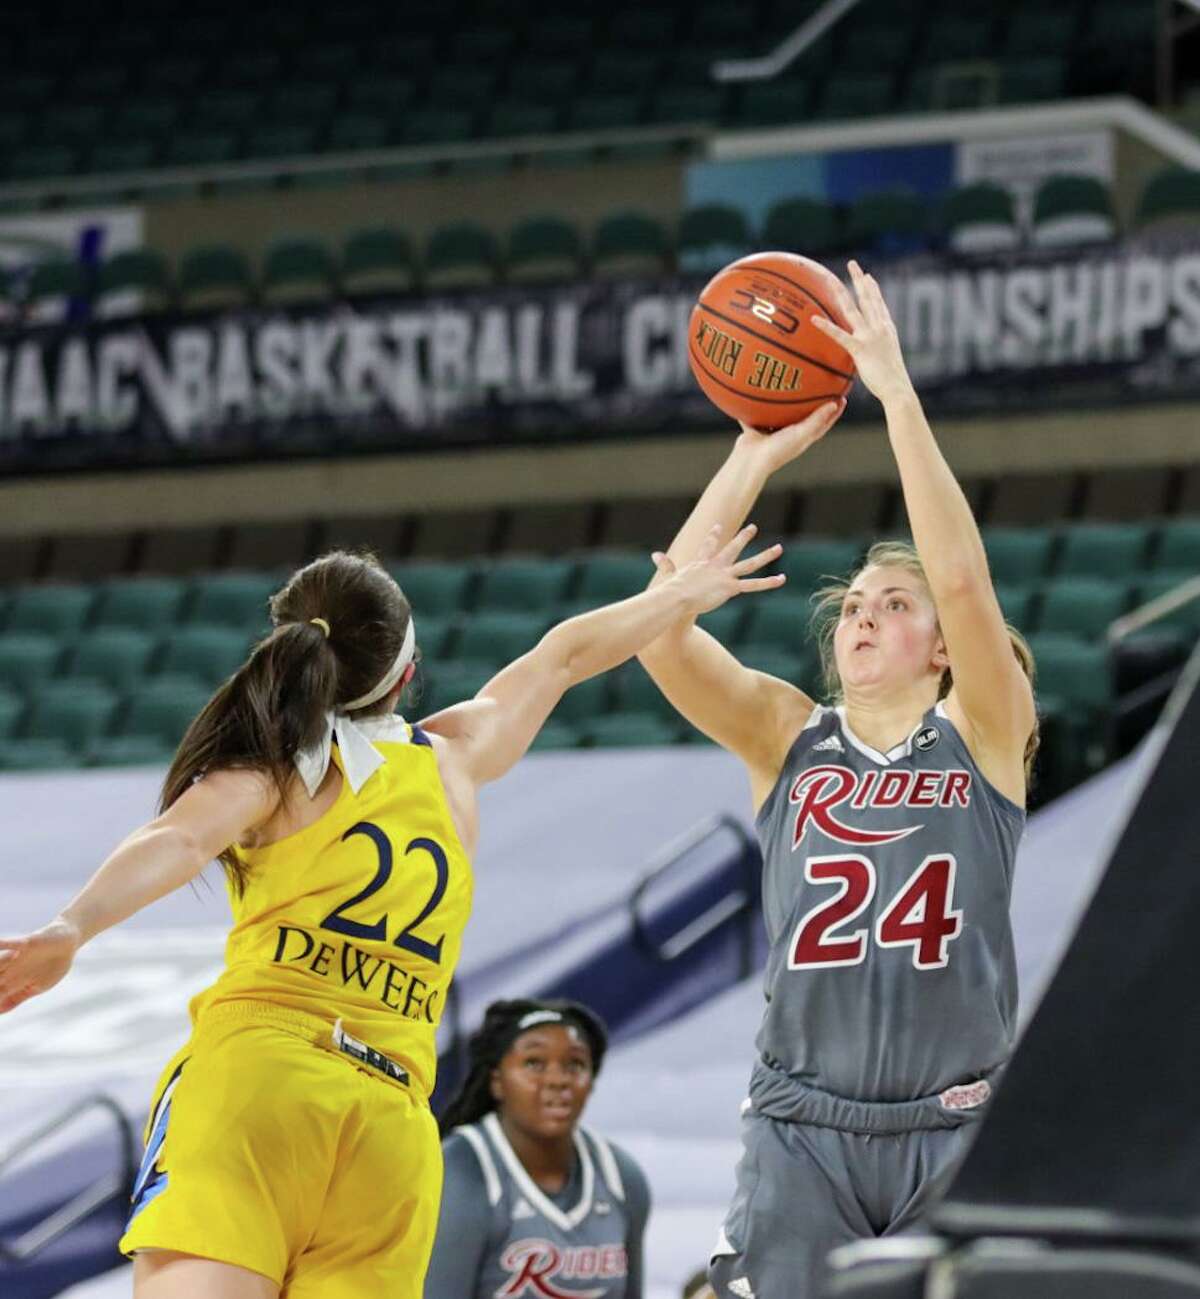 Quinnipiac junior guard Mackenzie DeWees reaches for the ball. The Bobcats were upset by No. 7 seed Rider, 62-50, in the quarterfinals of the 2021 MAAC Tournament. Photo courtesy of MAAC Tournament.